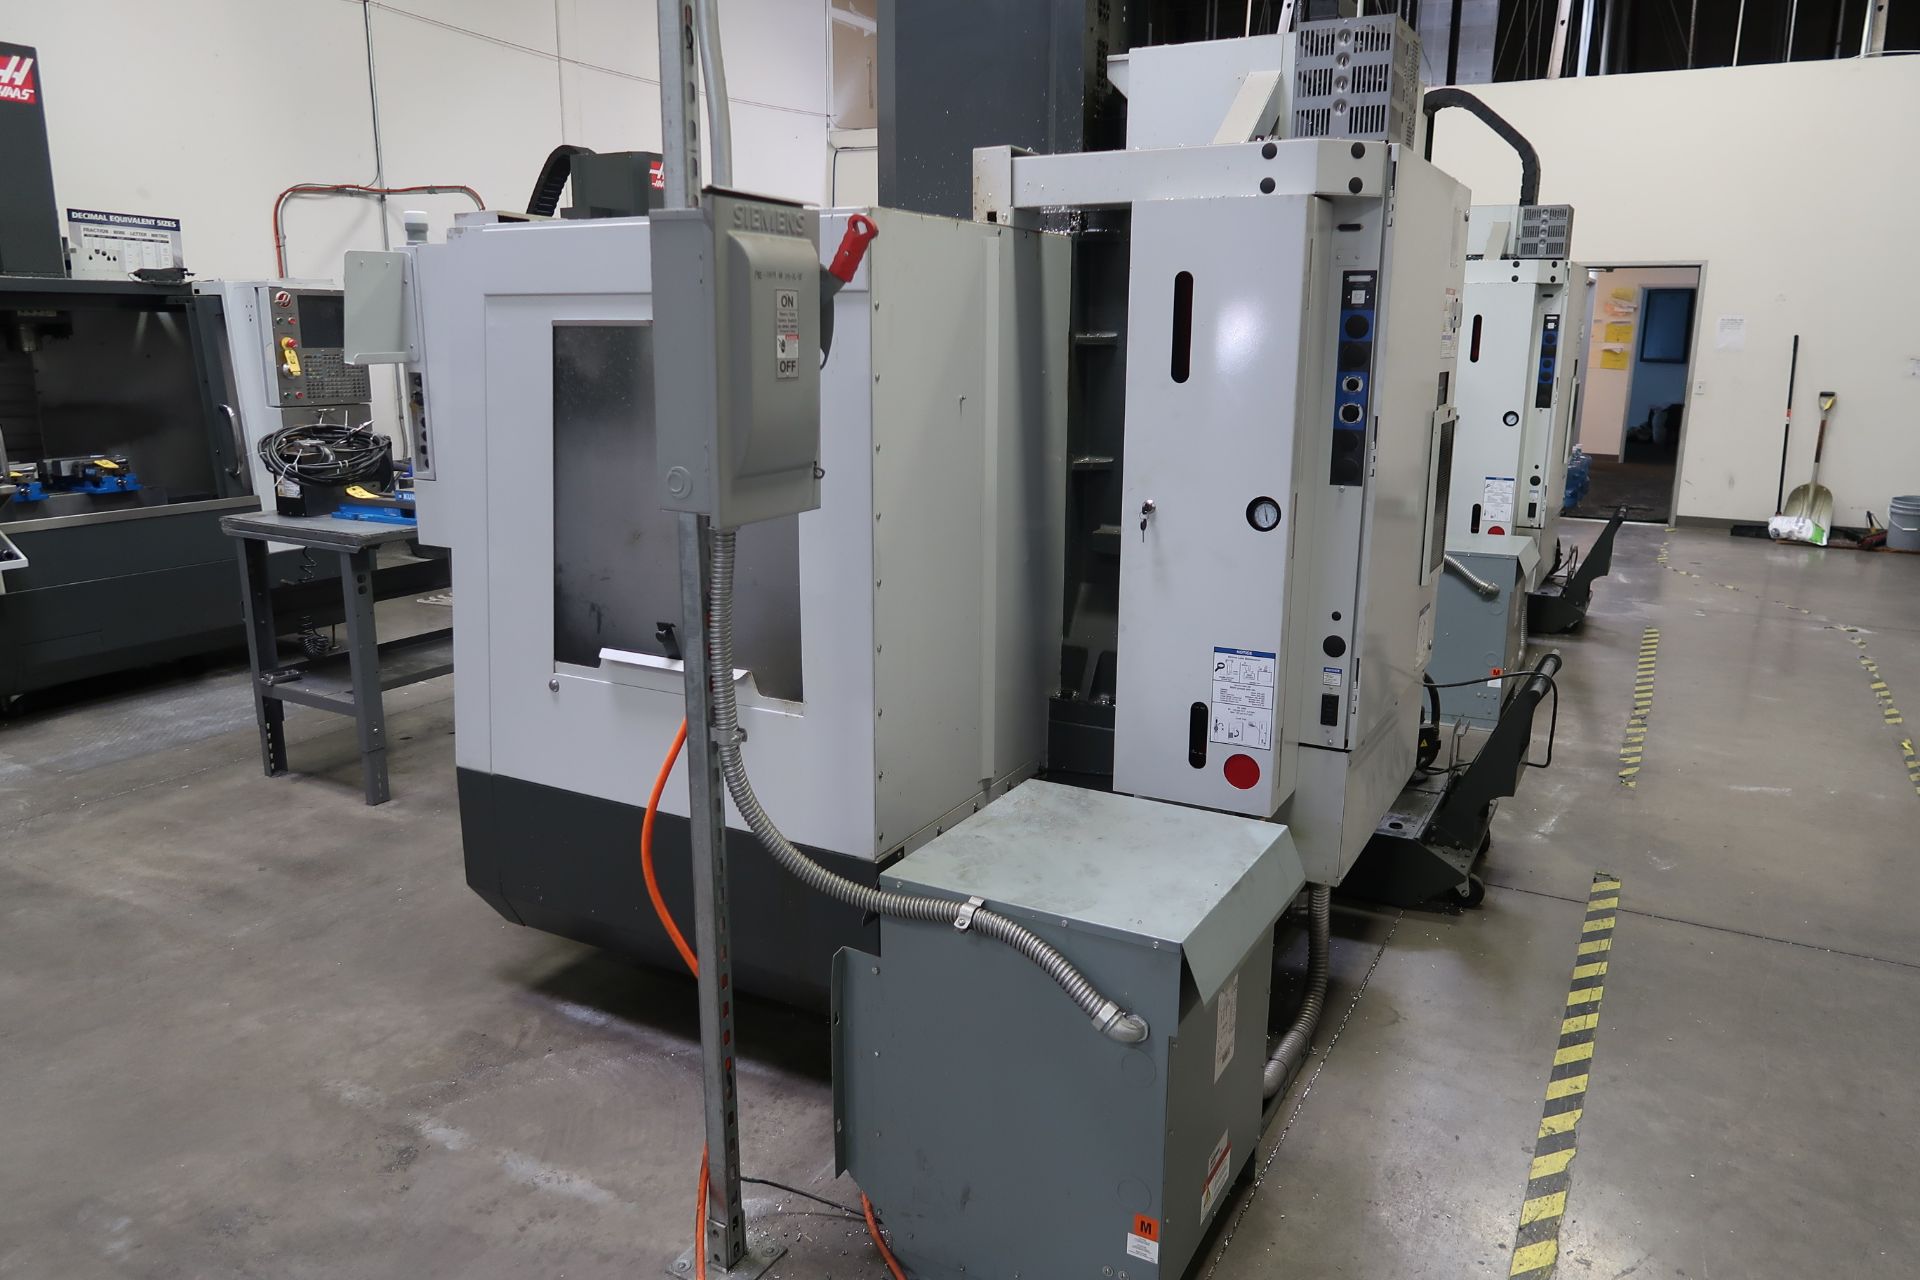 2014 HAAS VF-2SS CNC VERTICAL MACHINING CENTER, CHIP AUGER, PROGRAMMABLE COOLANT, 24 TOOL ATC, SN. - Image 9 of 10